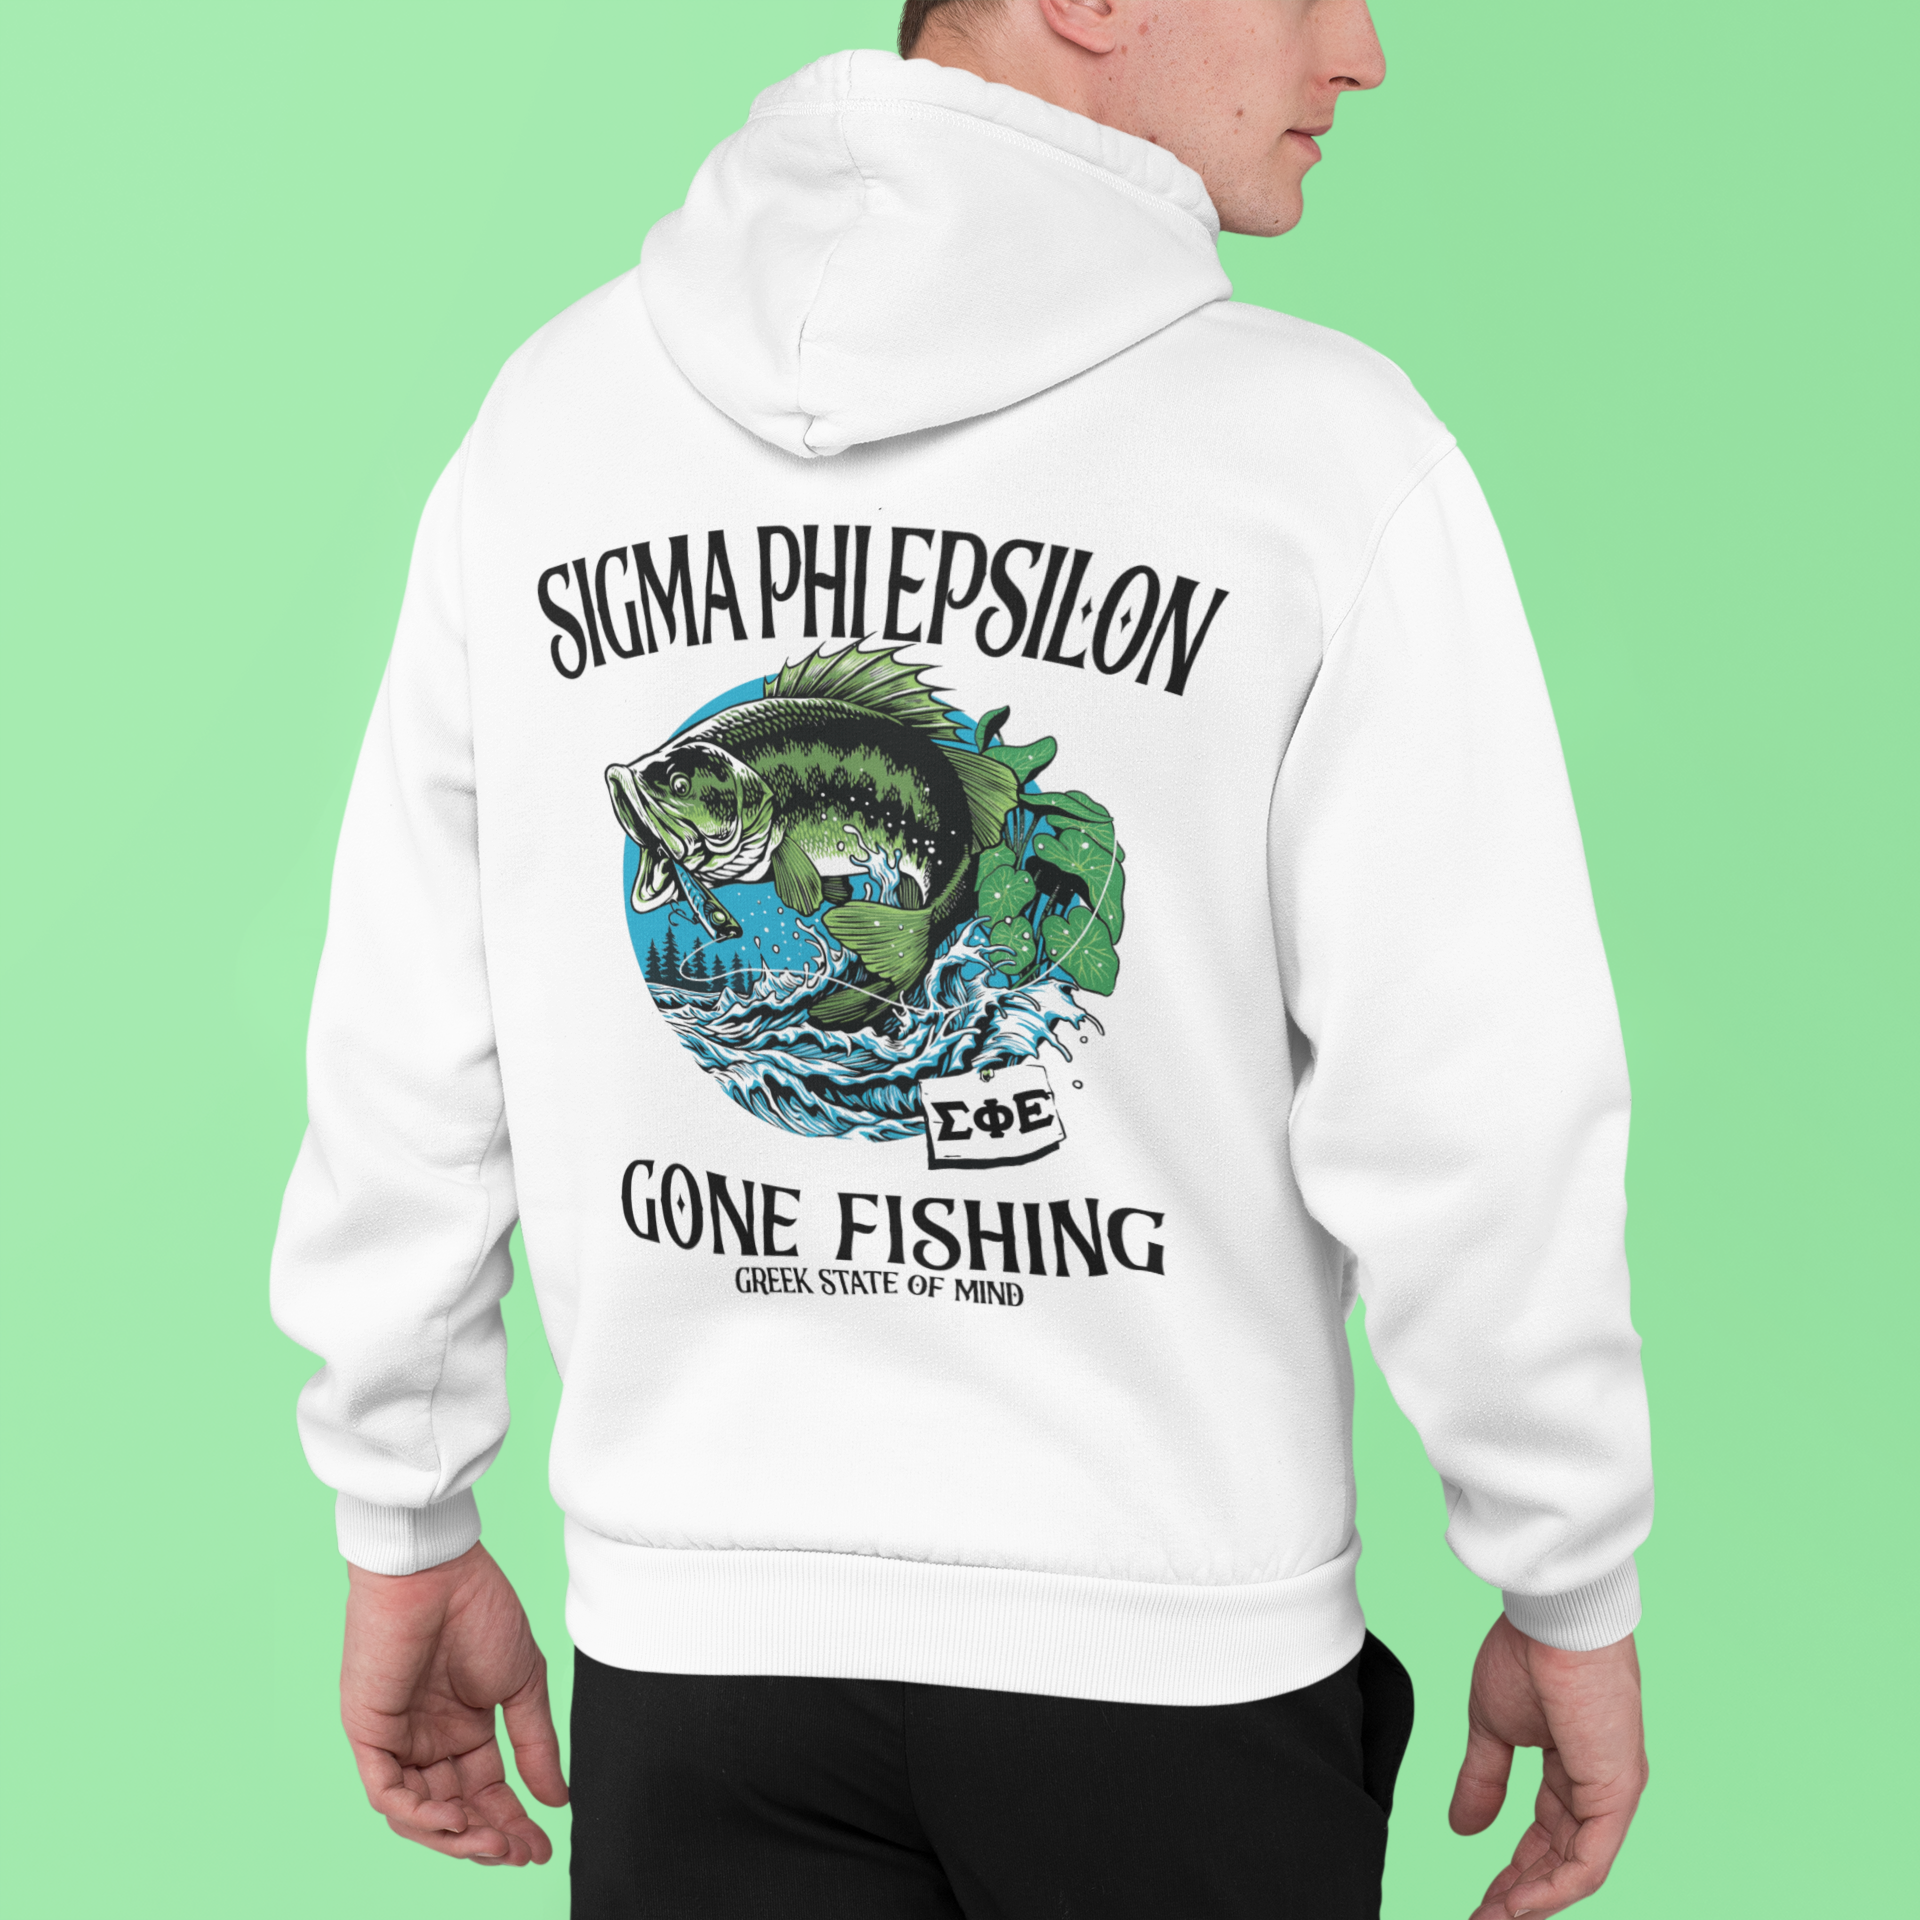 White Sigma Phi Epsilon Graphic Hoodie | Gone Fishing | SigEp Clothing - Campus Apparel model 